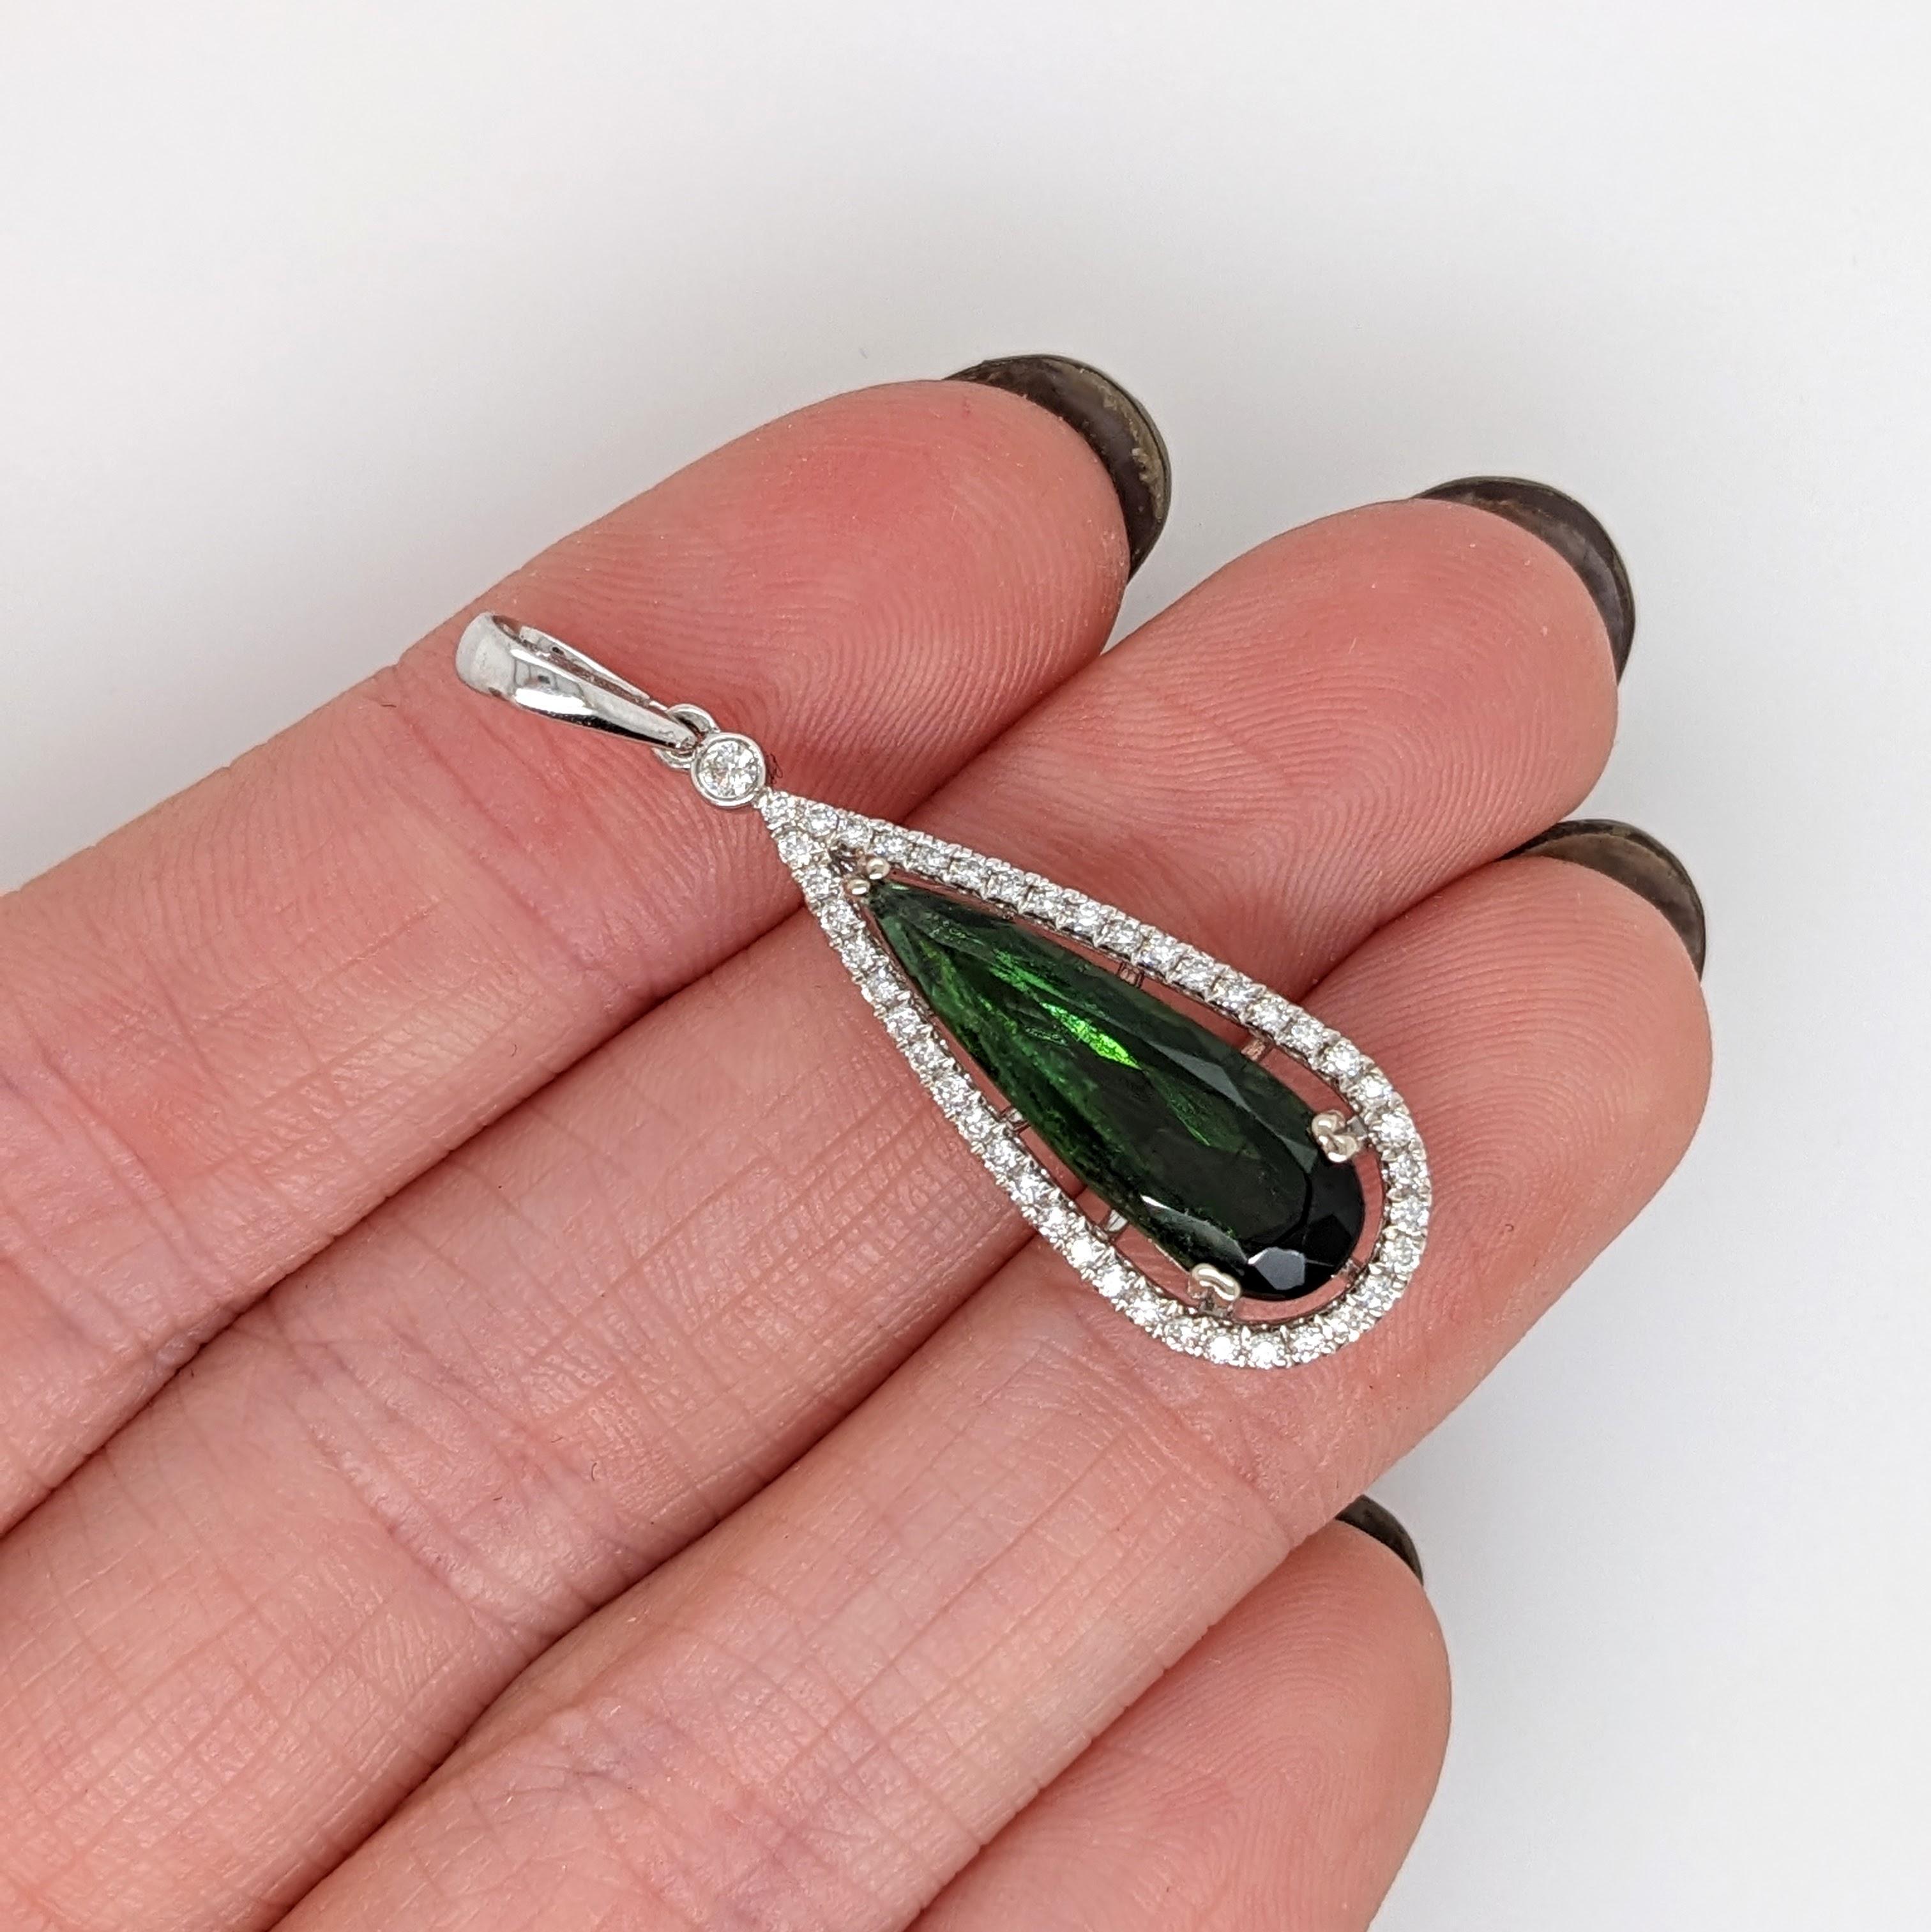 This beautiful pendant features a 3.40 carat pear shape green tourmaline with natural earth mined diamonds, all set in solid 14K gold. This pendant can be a lovely October birthstone gift for your loved ones! 

Specifications

Item Type: